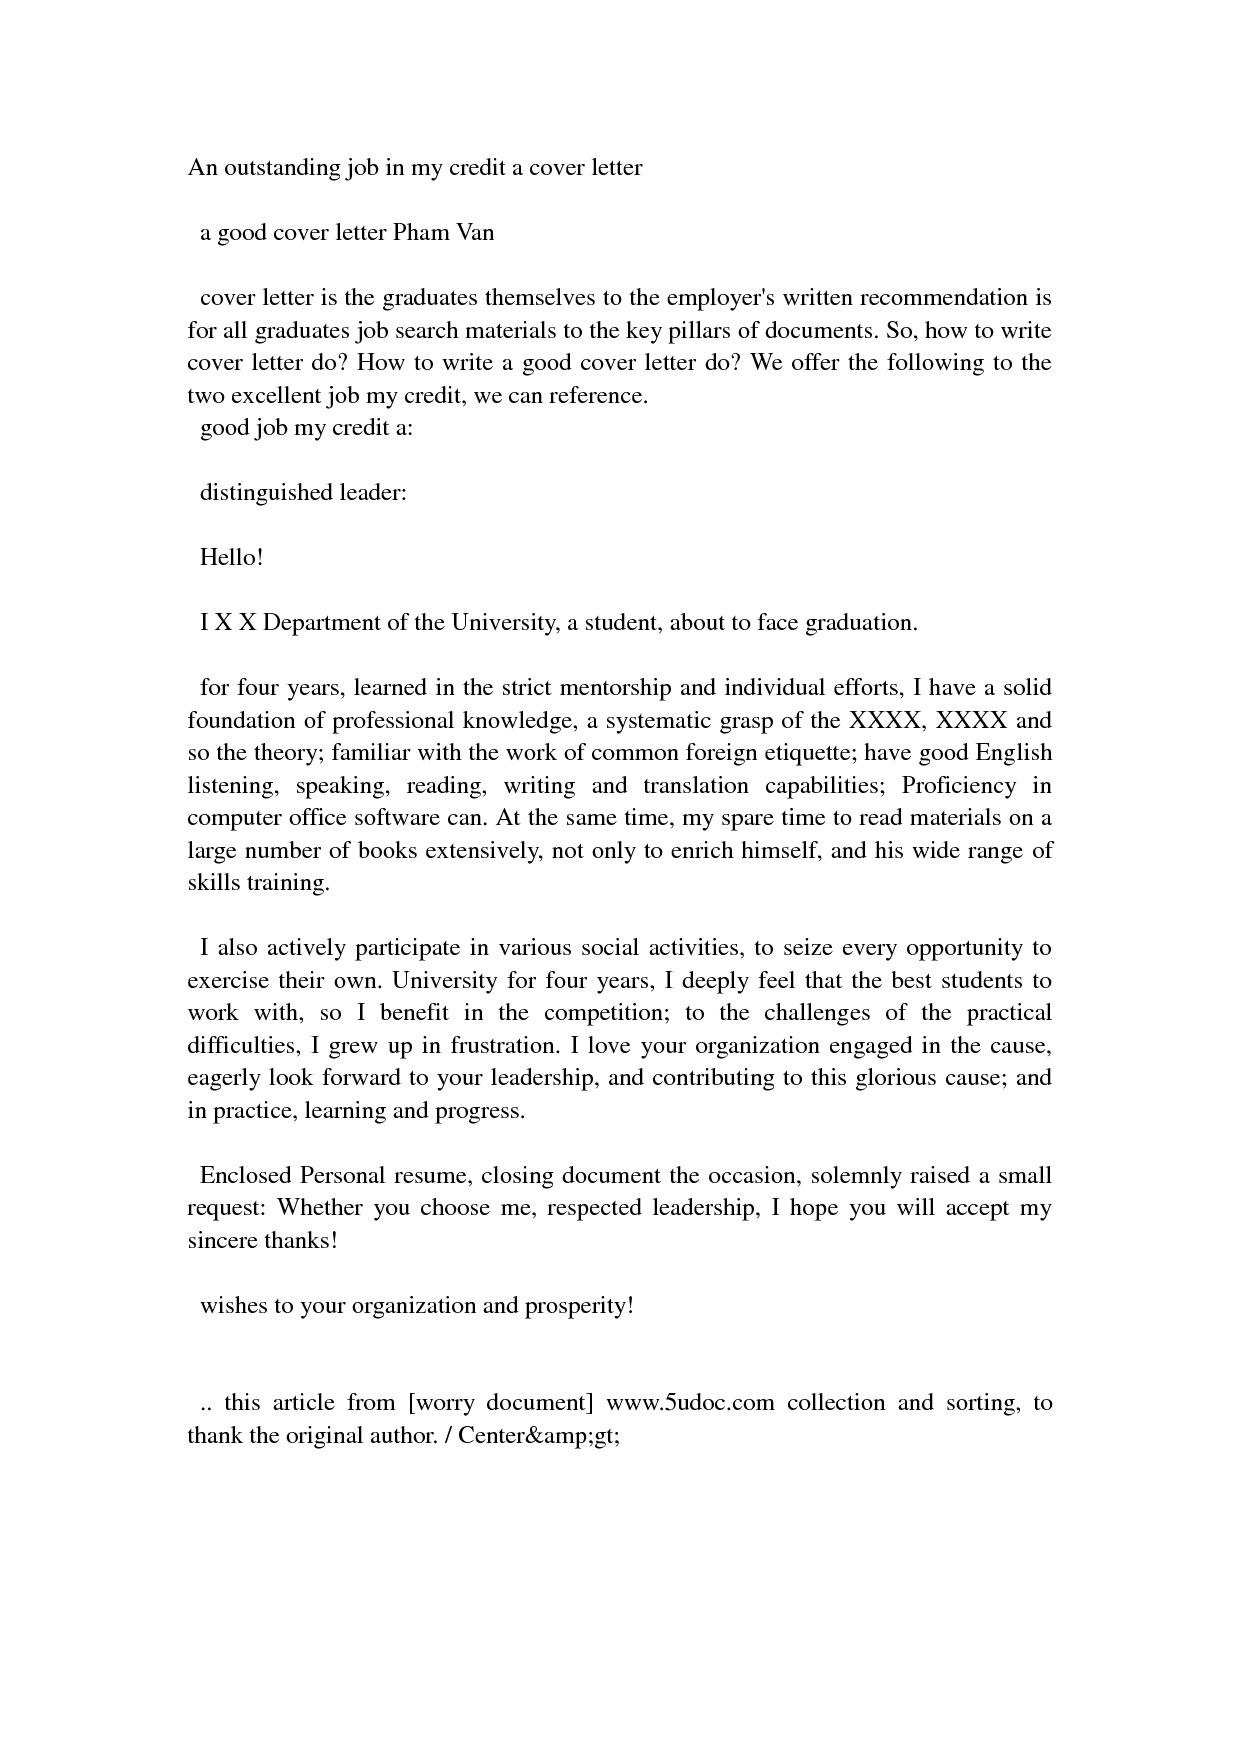 Exemplary Cover Letters Essay On Republic Day January 26 Complete Essay for Class 10